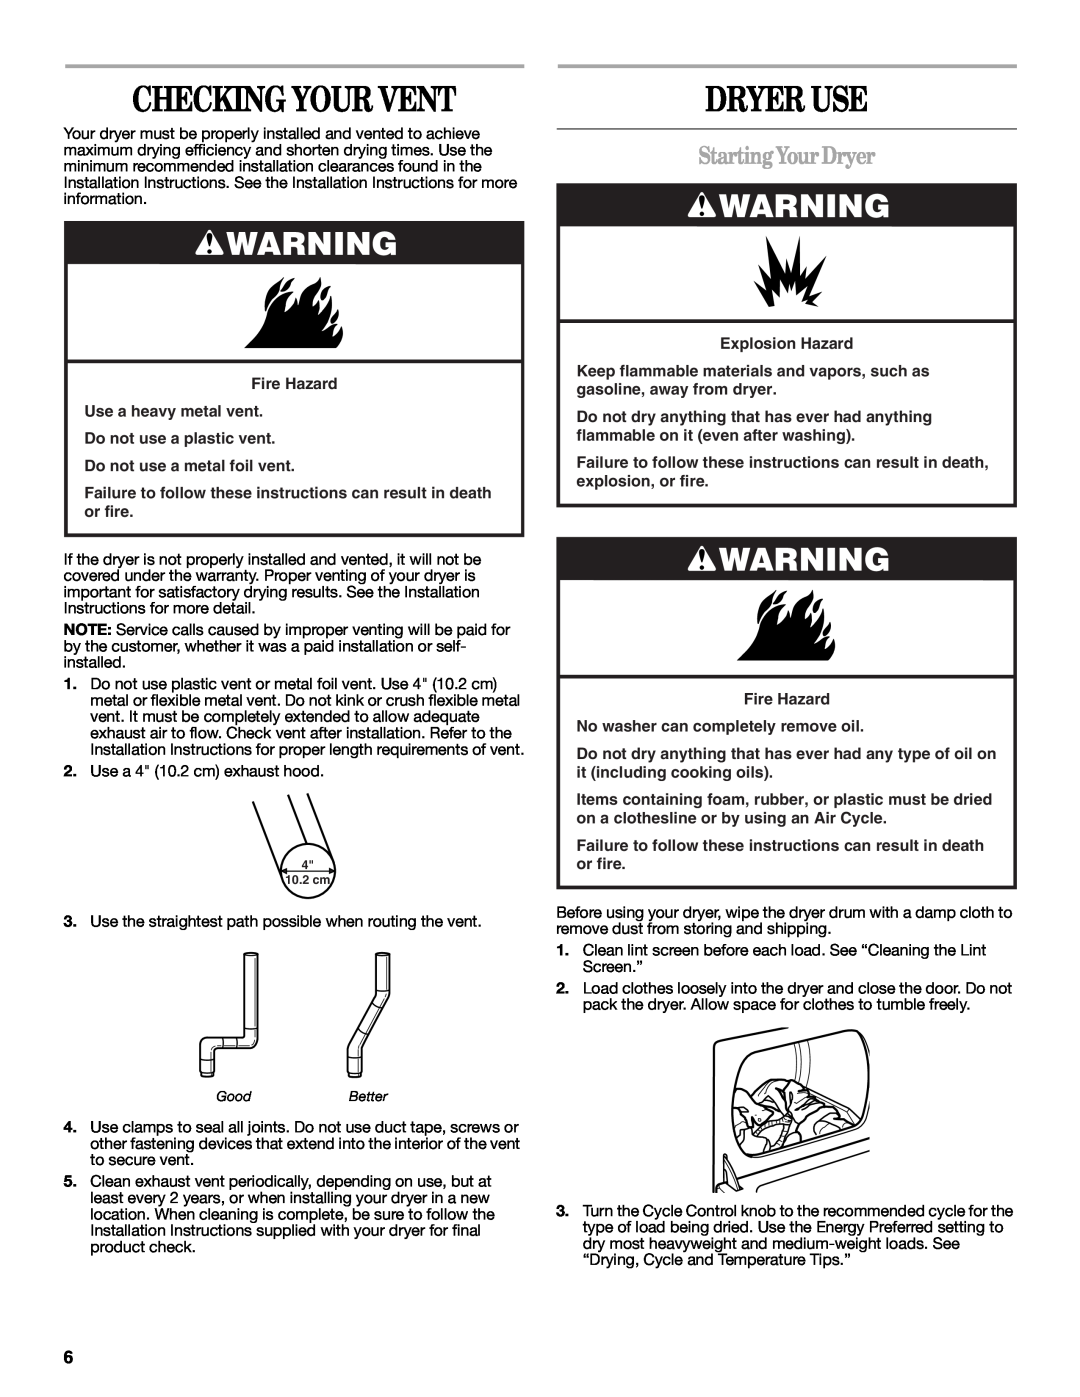 Whirlpool Top-Load Dryer manual Dryer Use, Starting Your Dryer, Checking Your Vent, Do not use a metal foil vent 